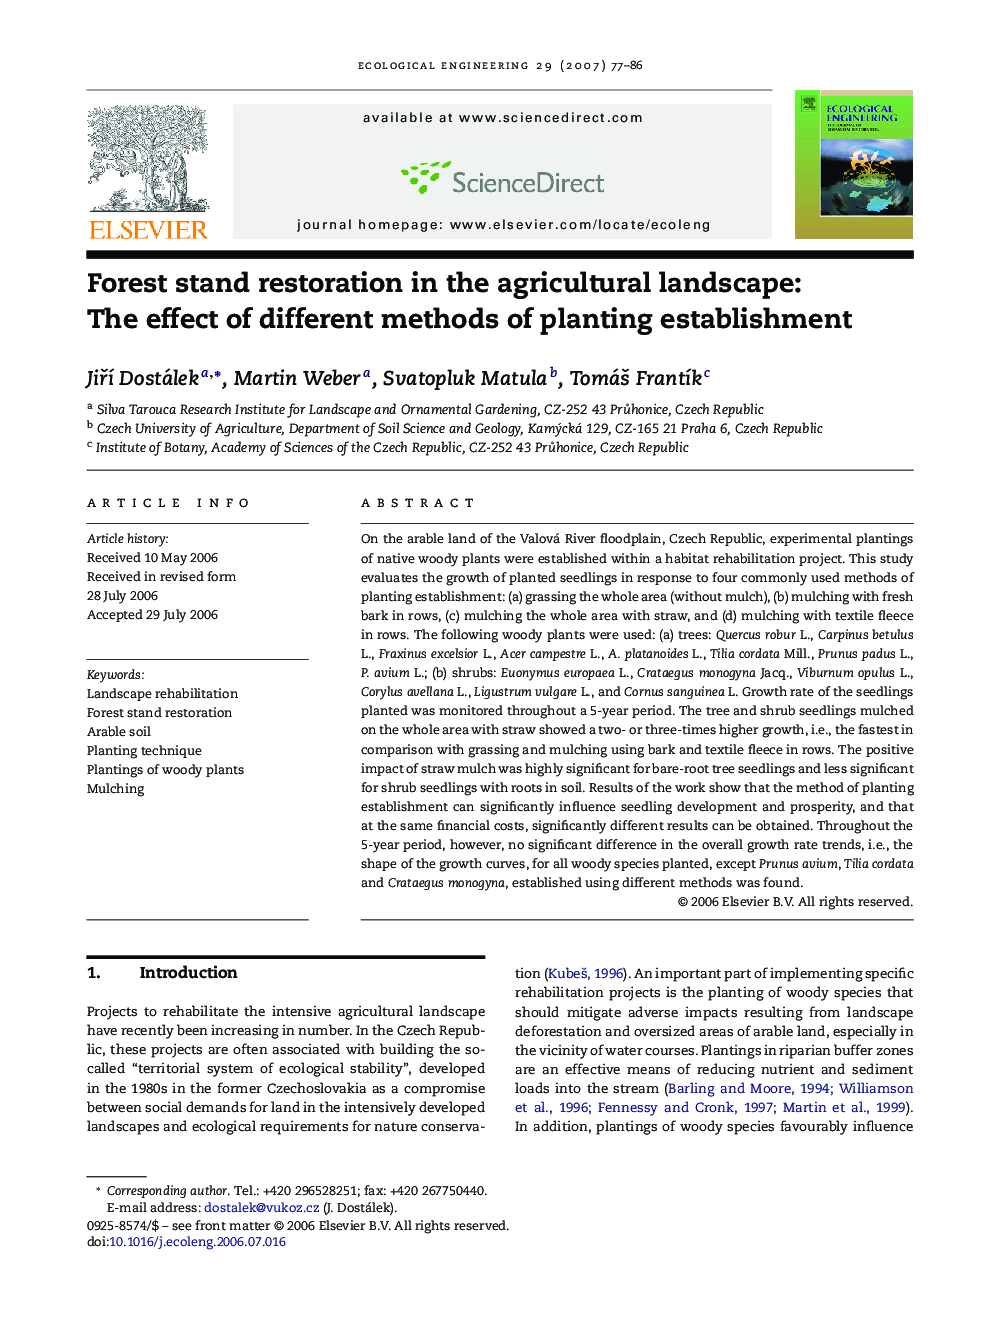 Forest stand restoration in the agricultural landscape: The effect of different methods of planting establishment